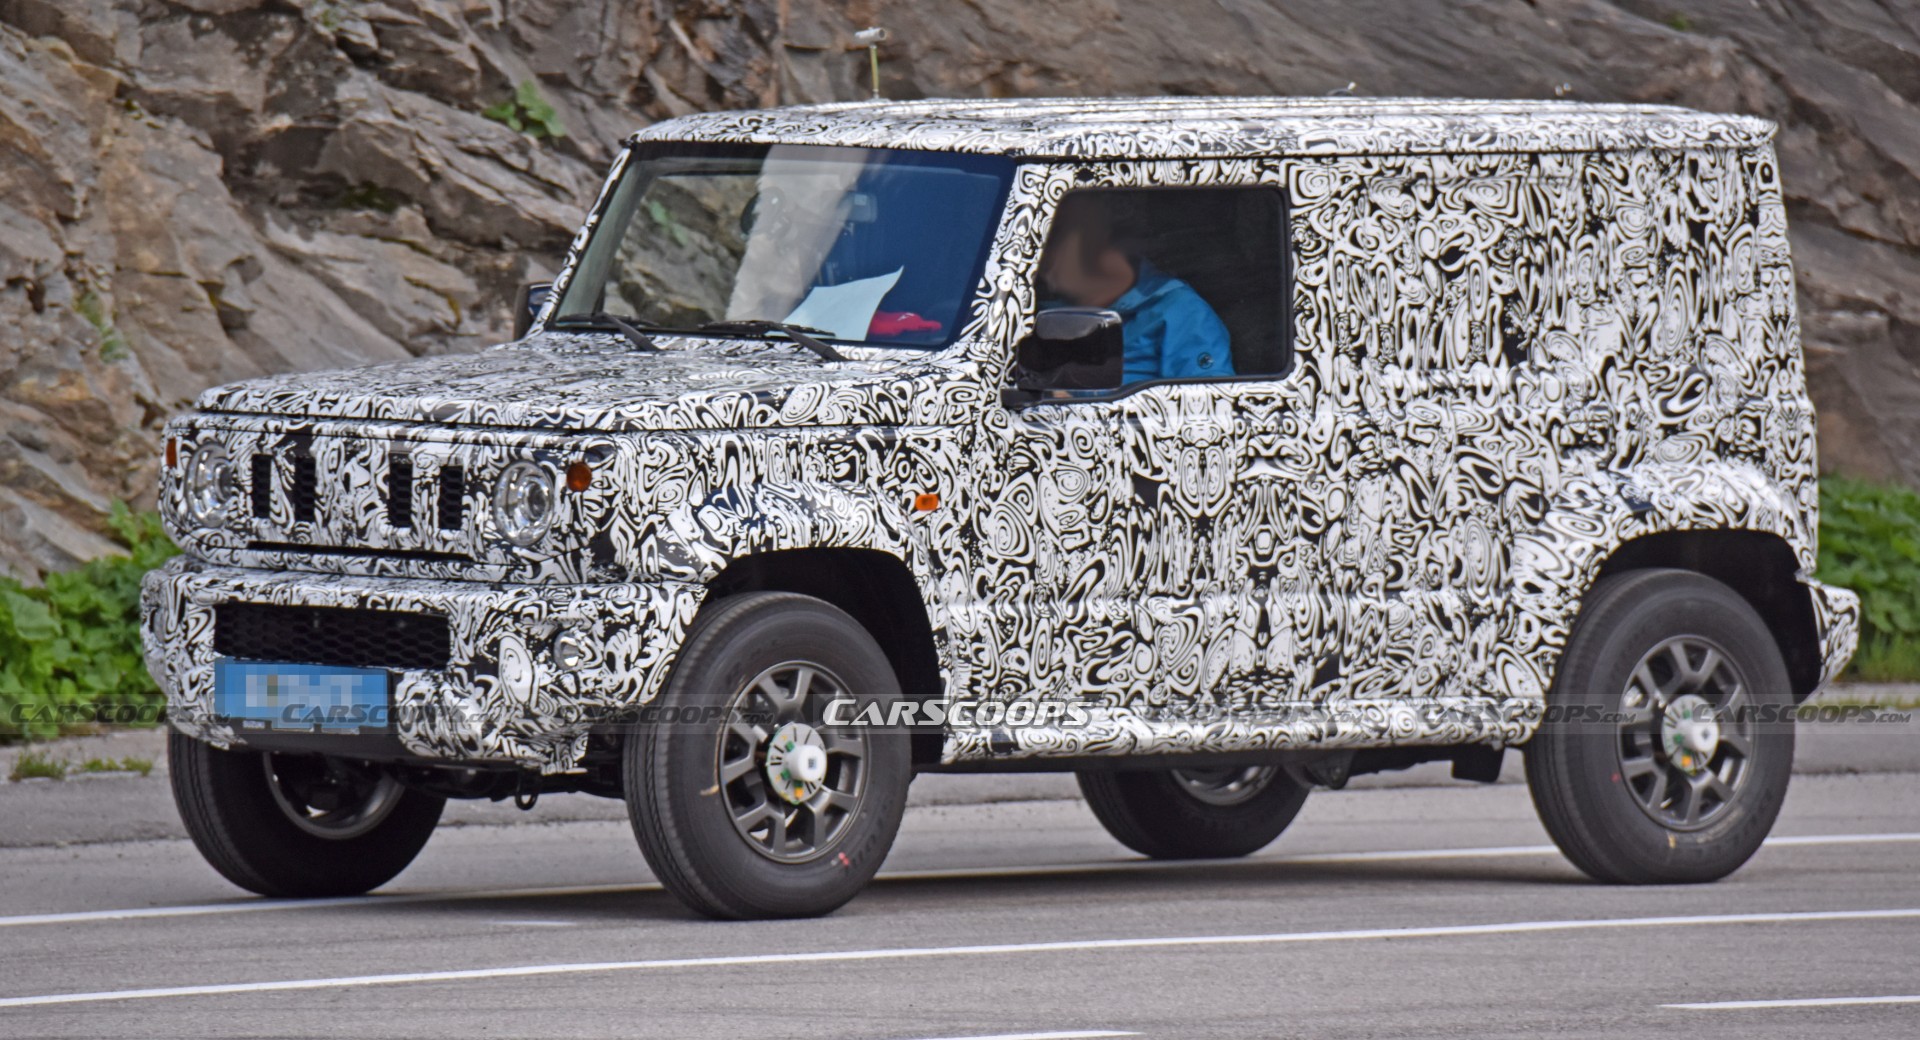 New Suzuki Jimny 5Door Prototype Spotted In Europe, Could Get A Hybrid Powertrain Carscoops